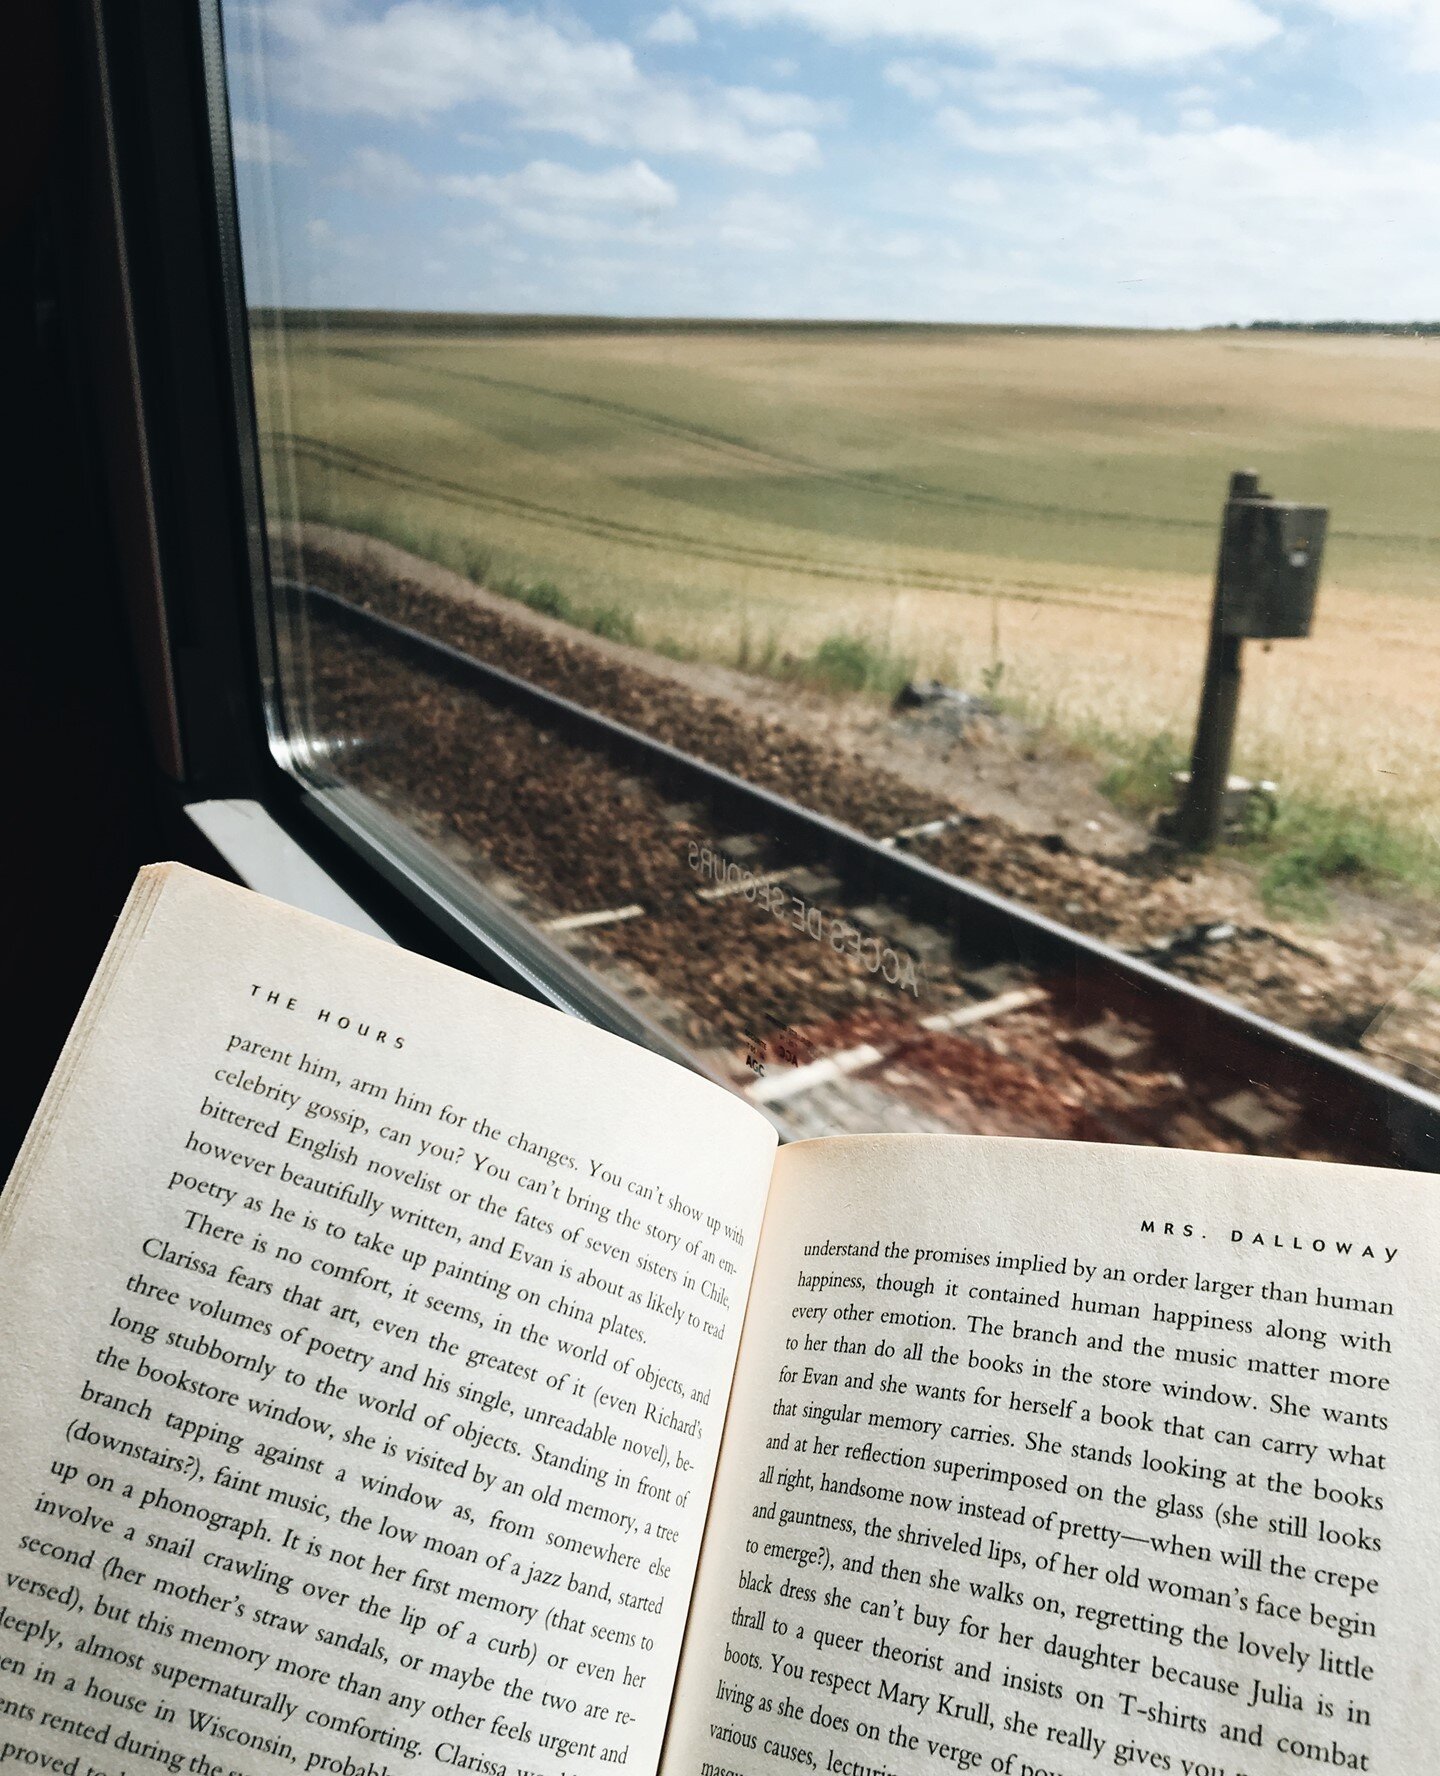 The best way to travel is by train and with a book. #Wildbound #InTheWIld